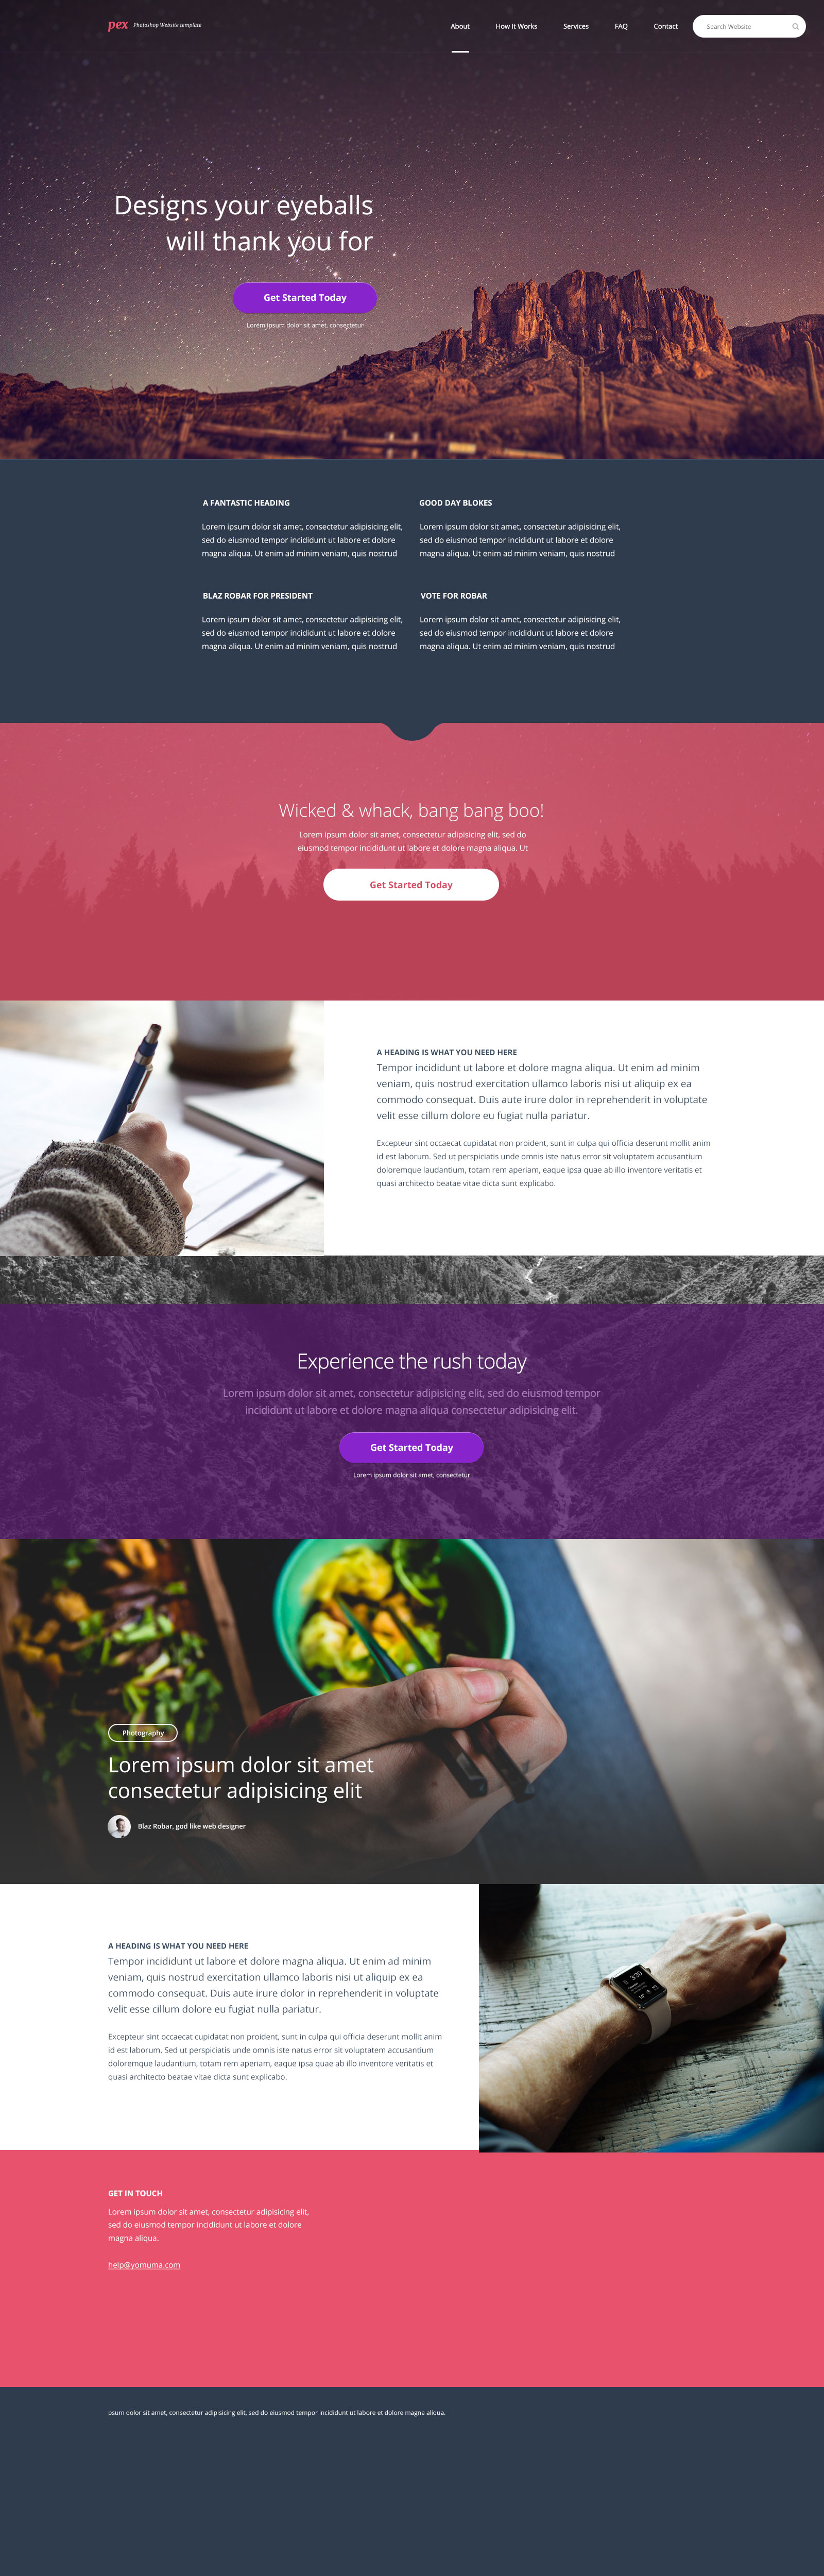 Pex - A Free Website One Page HTML Template